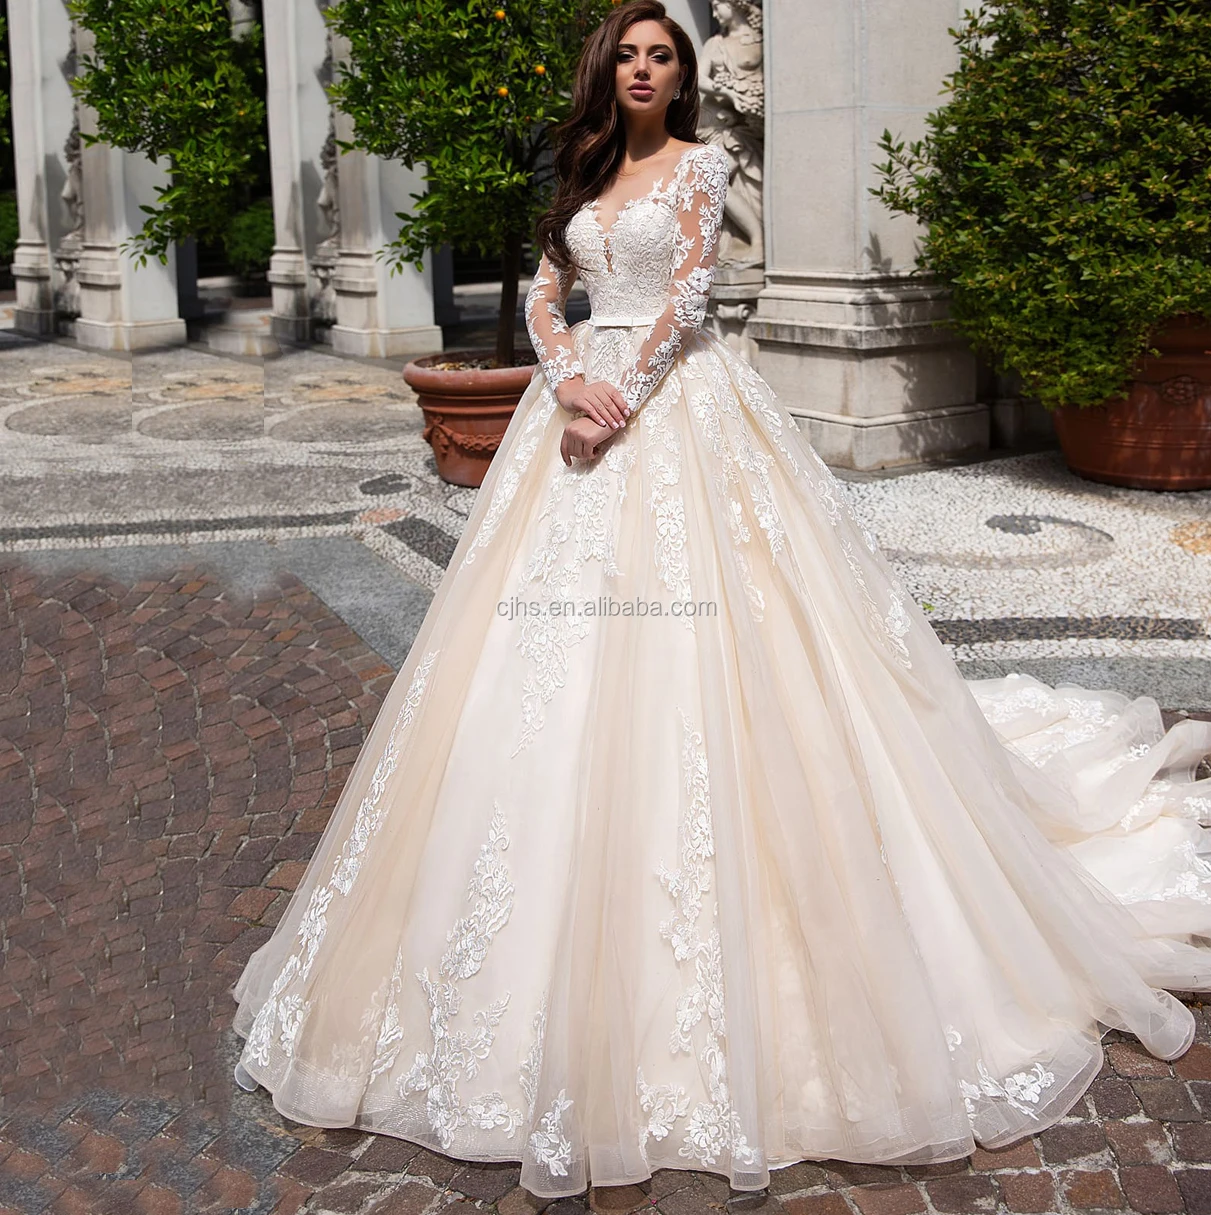 Beading Lace Flowers Chiffon Beach Wedding Dresses With Shawl Elegant  Alibaba China Skirt Slit Open Back Sexy Bridal Gowns From 232,3 € | DHgate